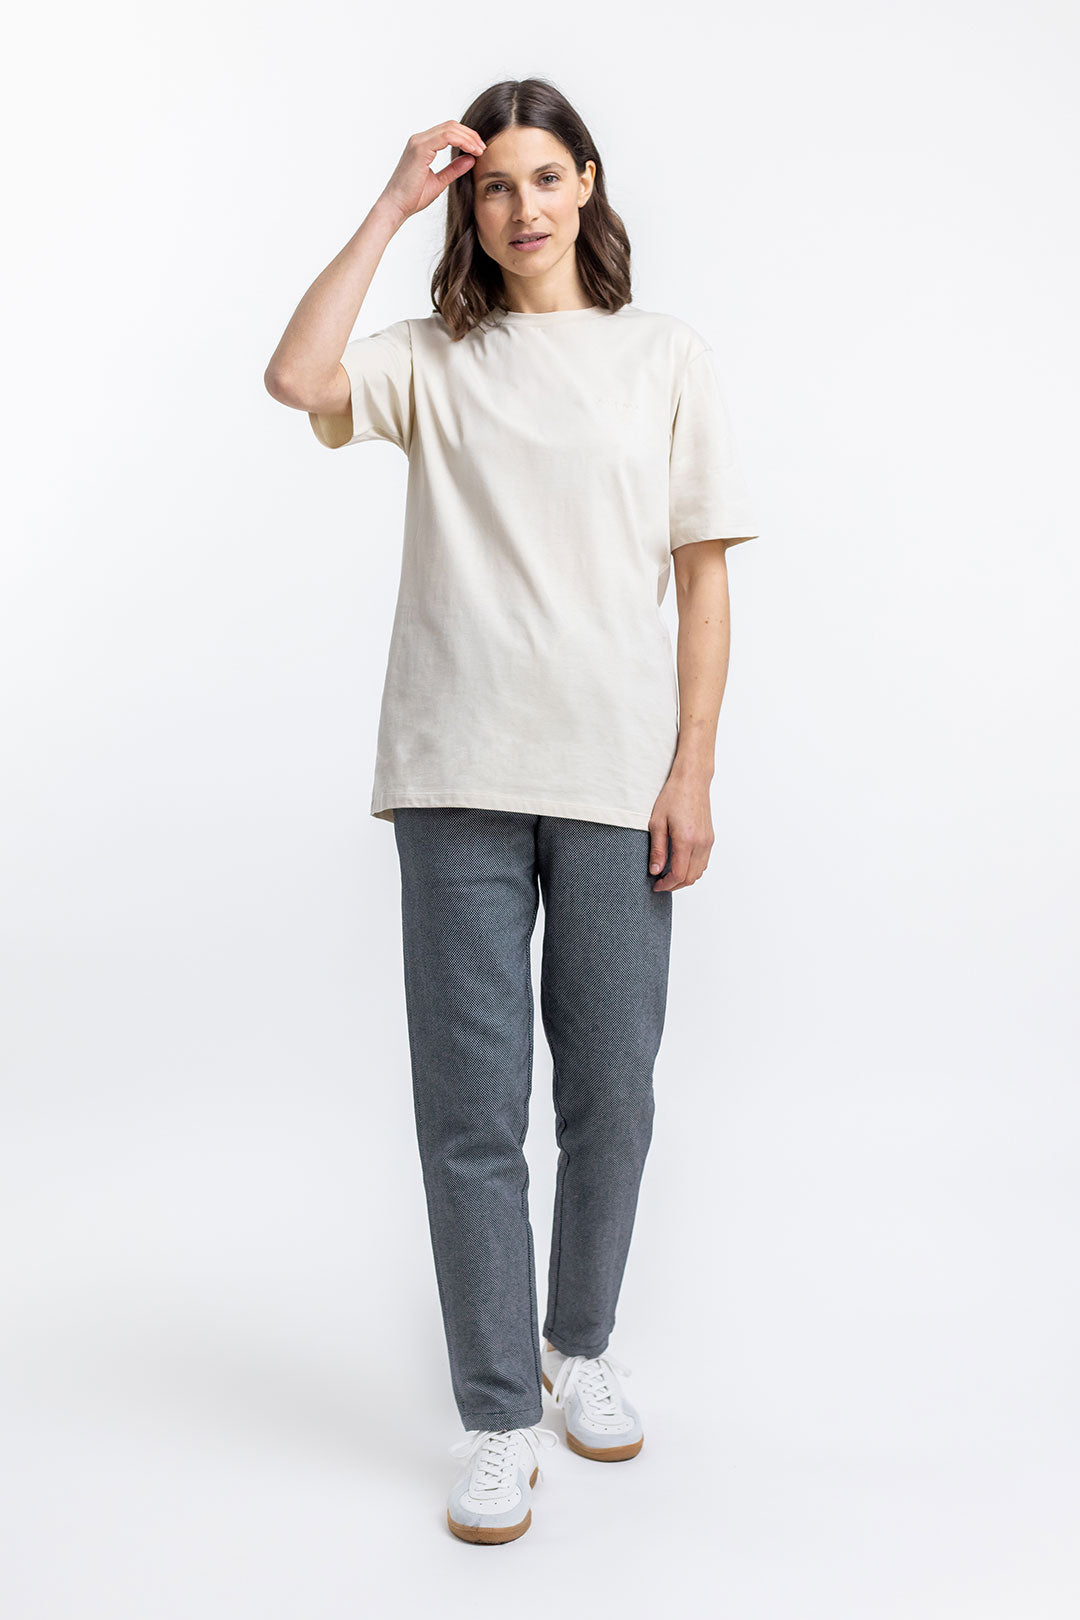 Beige T-shirt logo made from 100% organic cotton from Rotholz